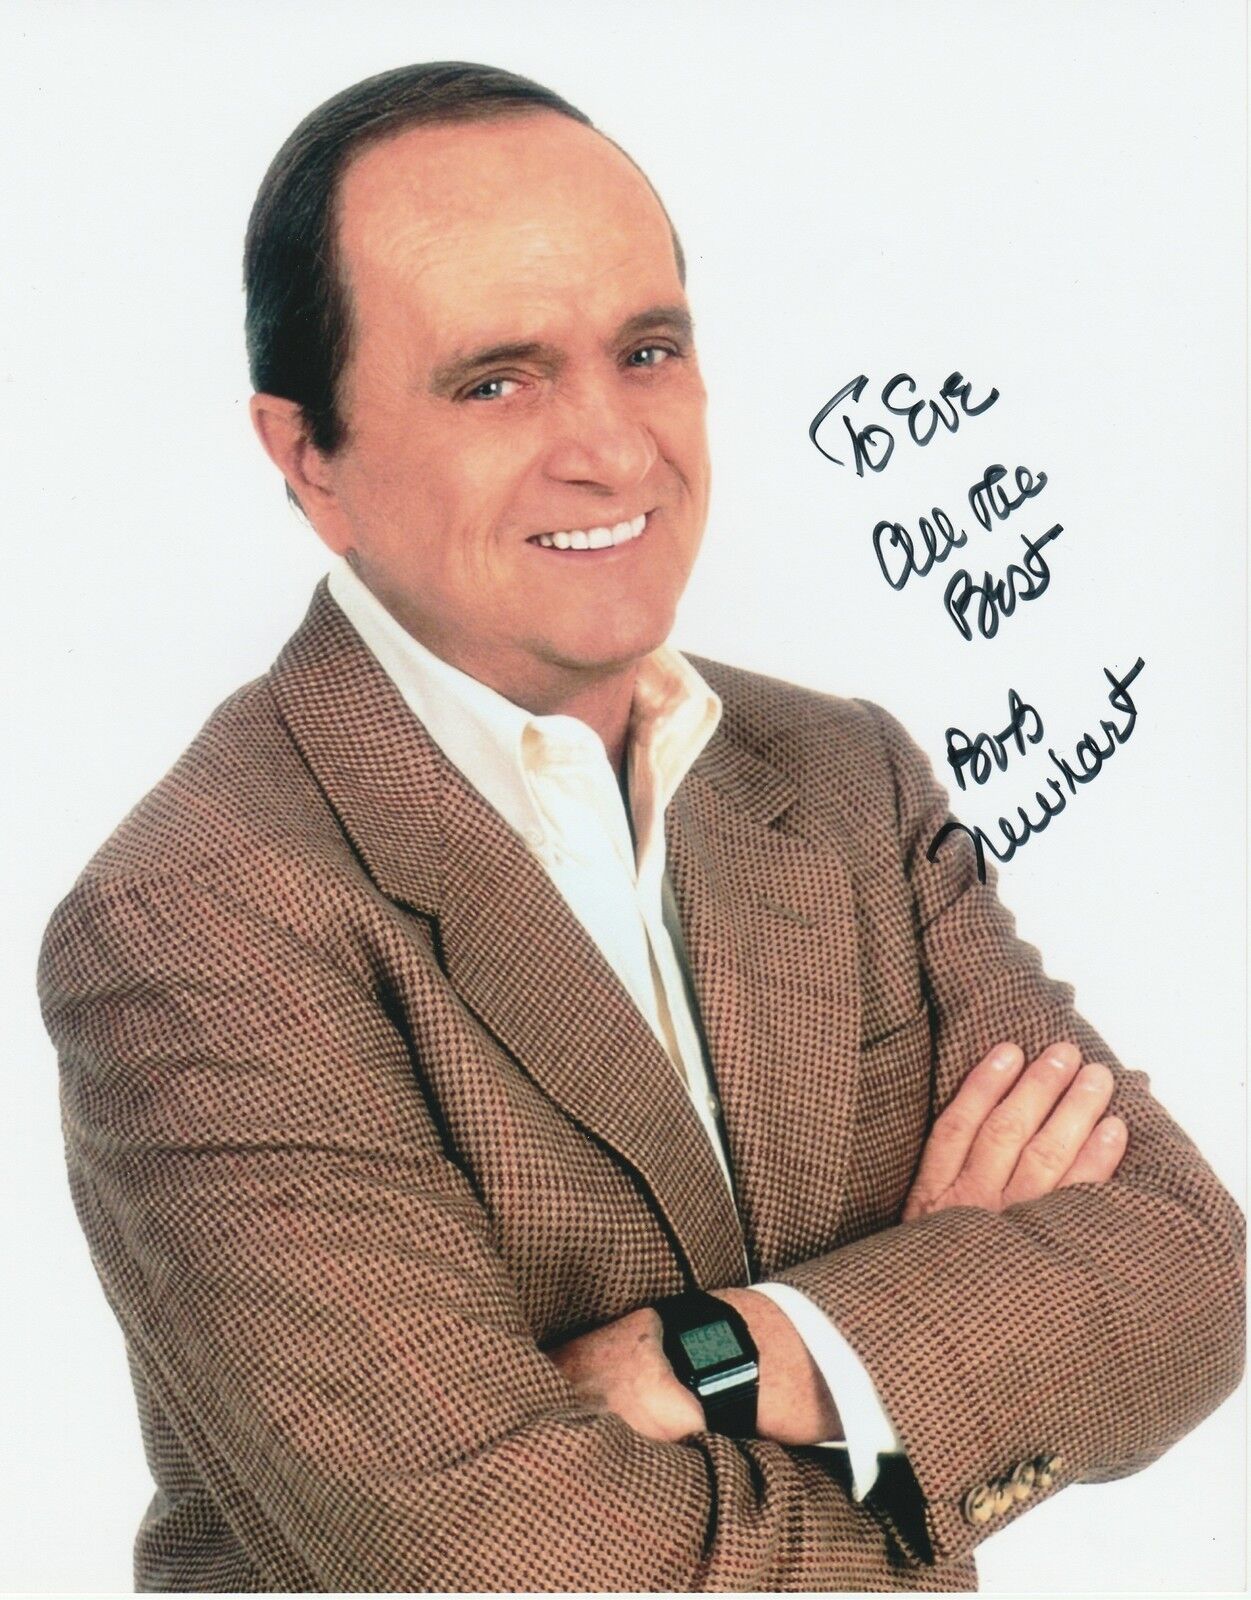 BOB NEWHART Autographed Signed Photo Poster paintinggraph - To Eve